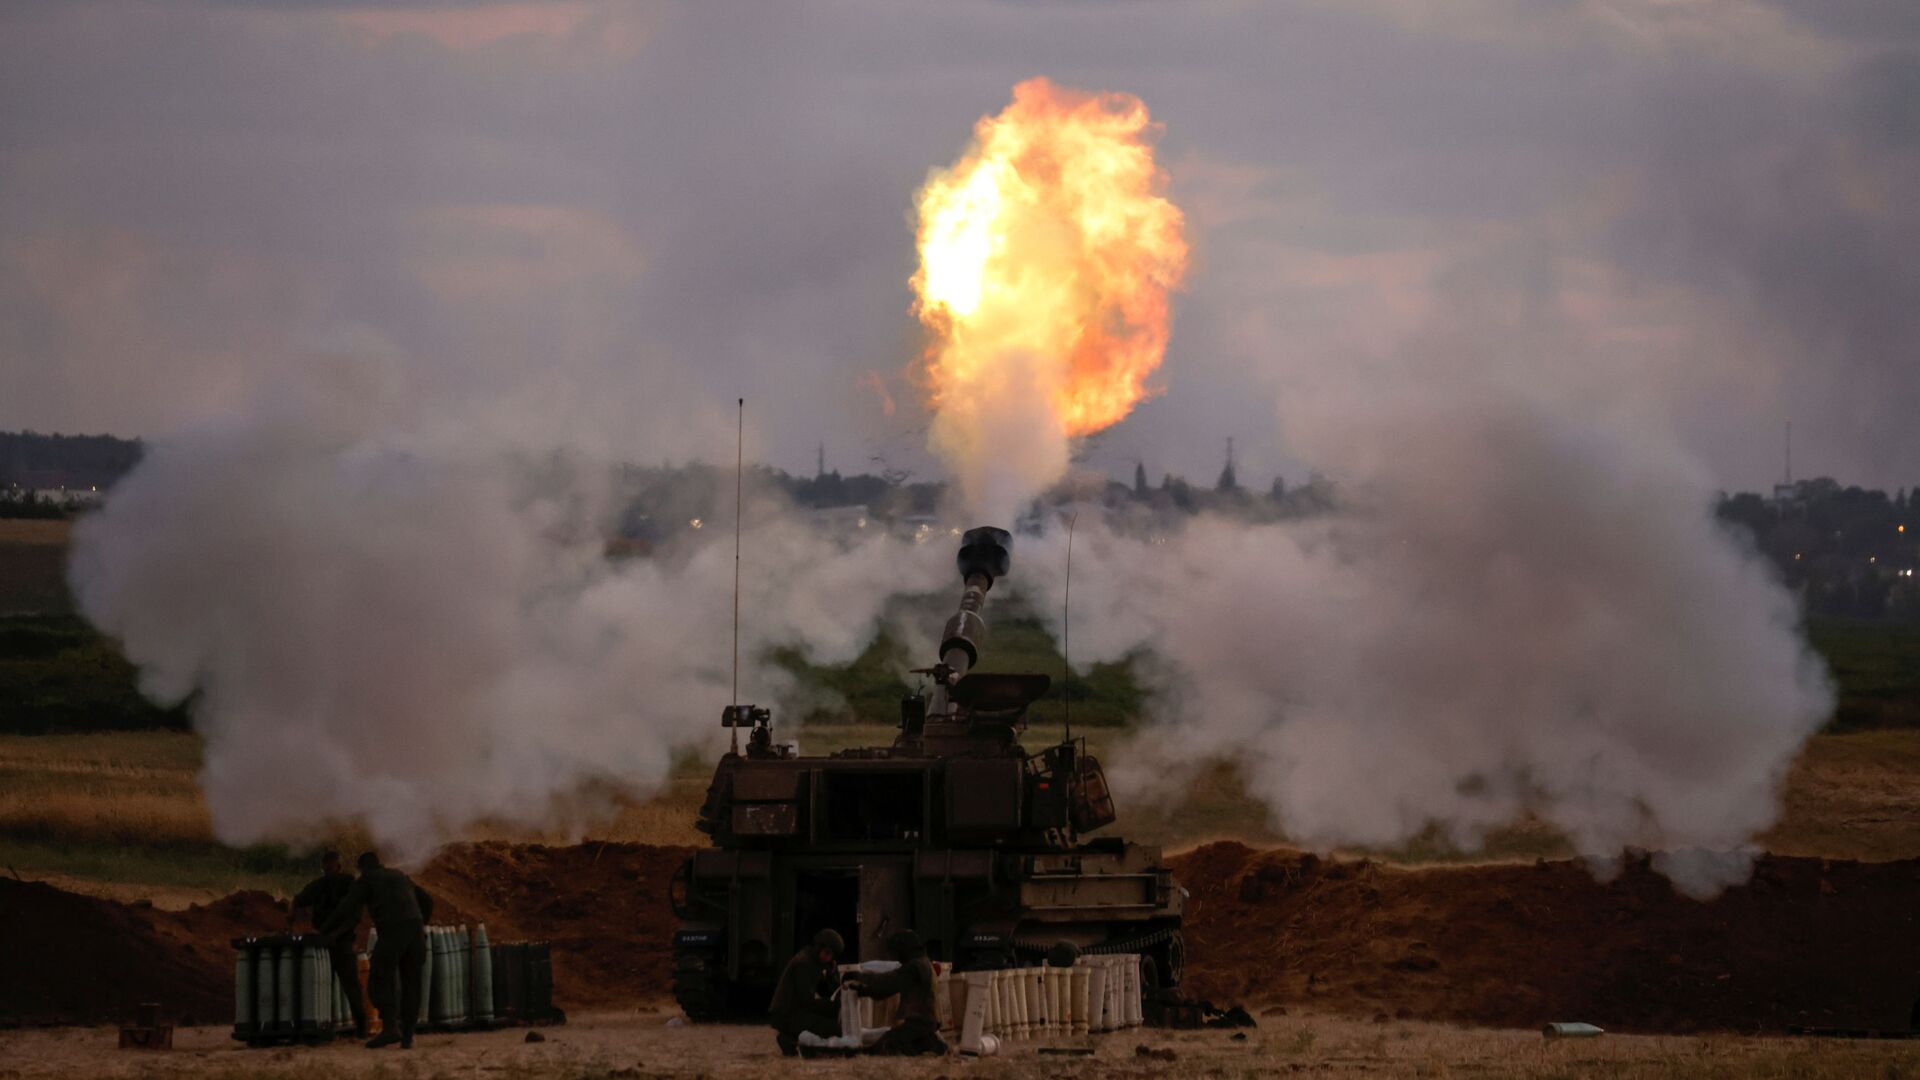 Israeli soldiers work at an artillery unit as it fires near the border between Israel and the Gaza strip, on the Israeli side May 17, 2021 - Sputnik International, 1920, 04.06.2021